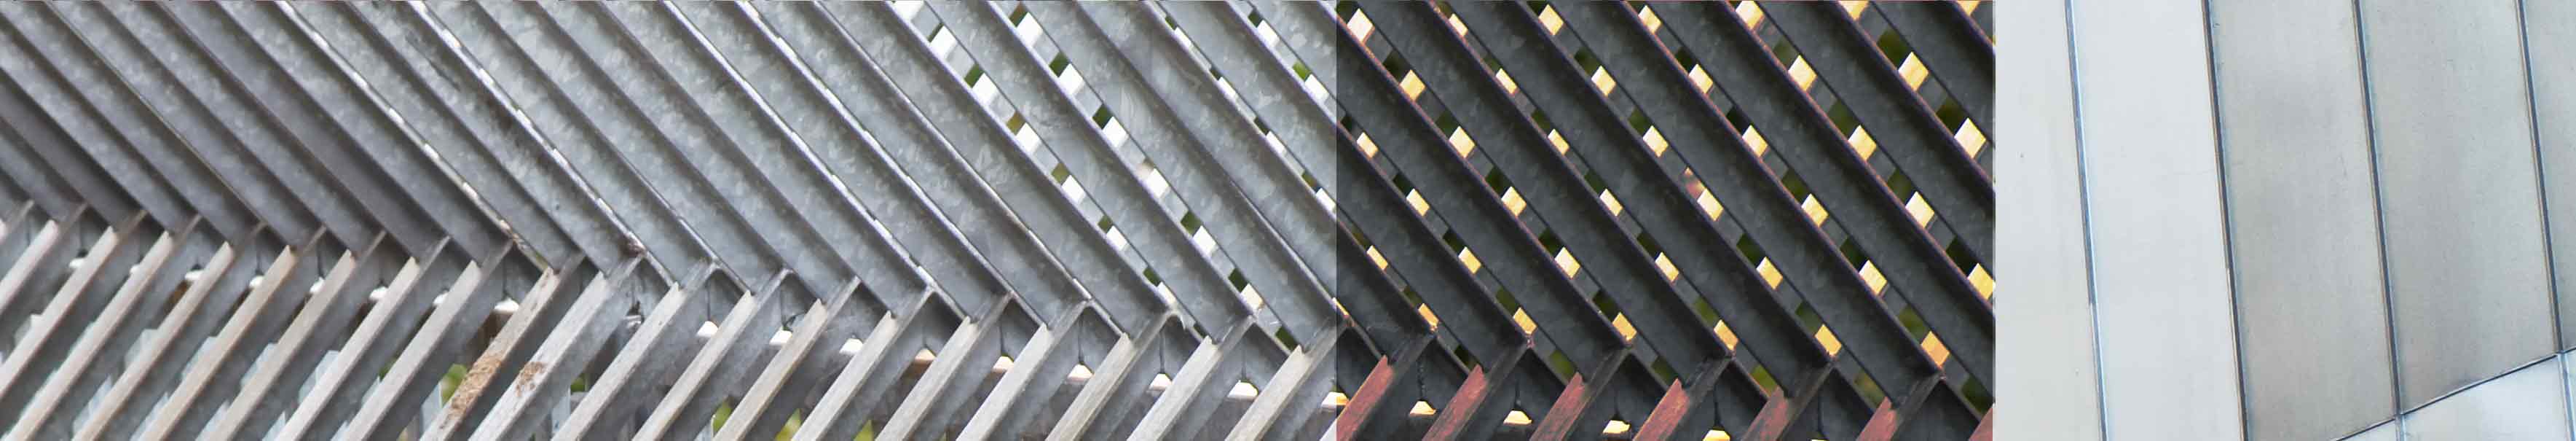 [scene 1 inert]<br />
			hard surfaces are unforgiving<br />
			proudly <span class="enlarge2x">inorganic </span> <br />
			shaped into solid geometries